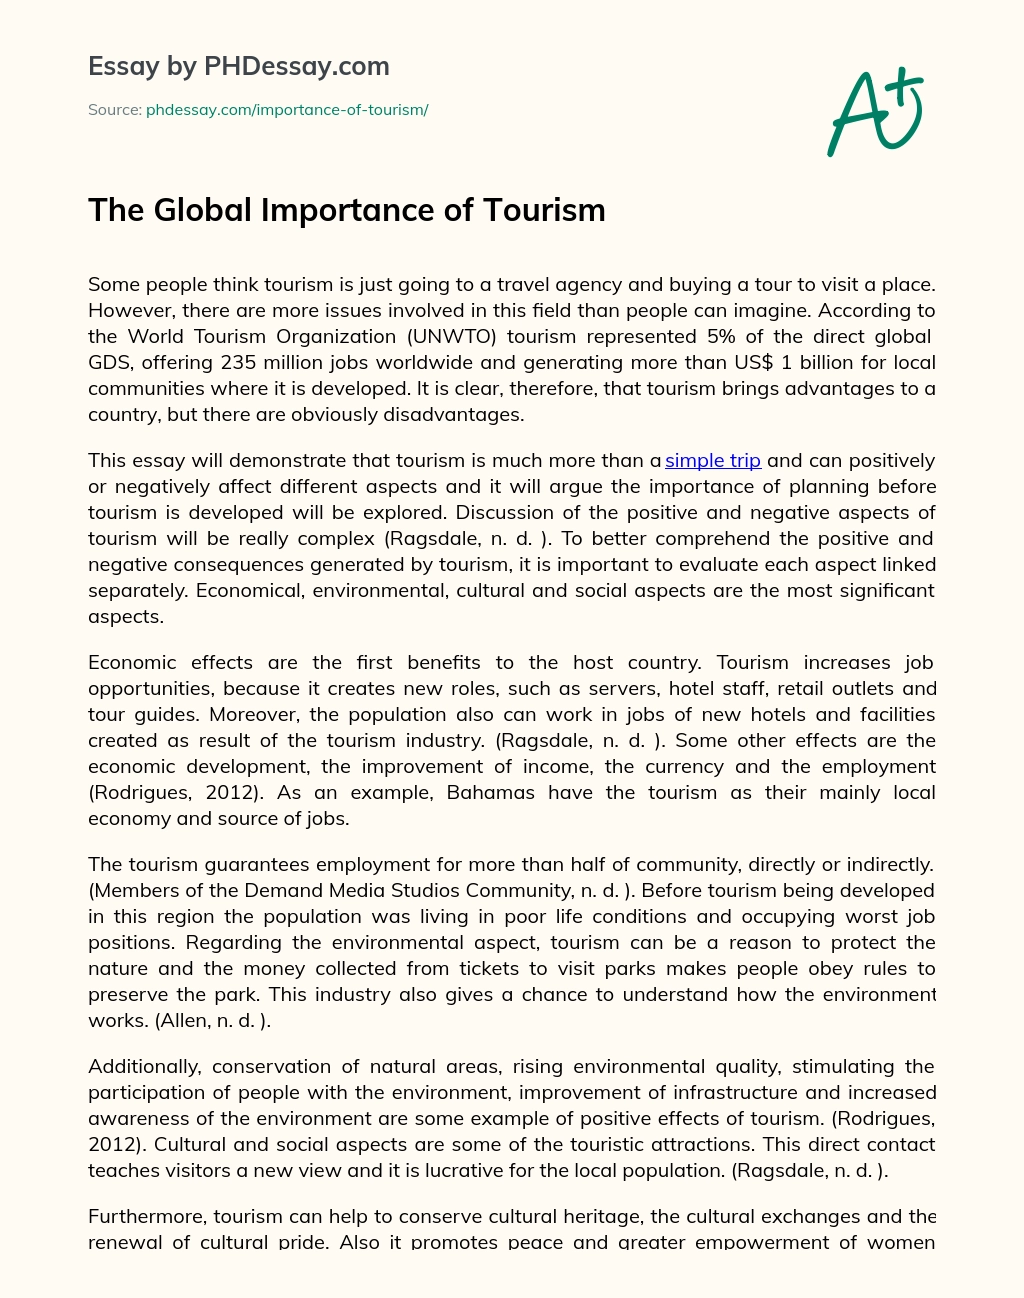 The Global Importance of Tourism essay